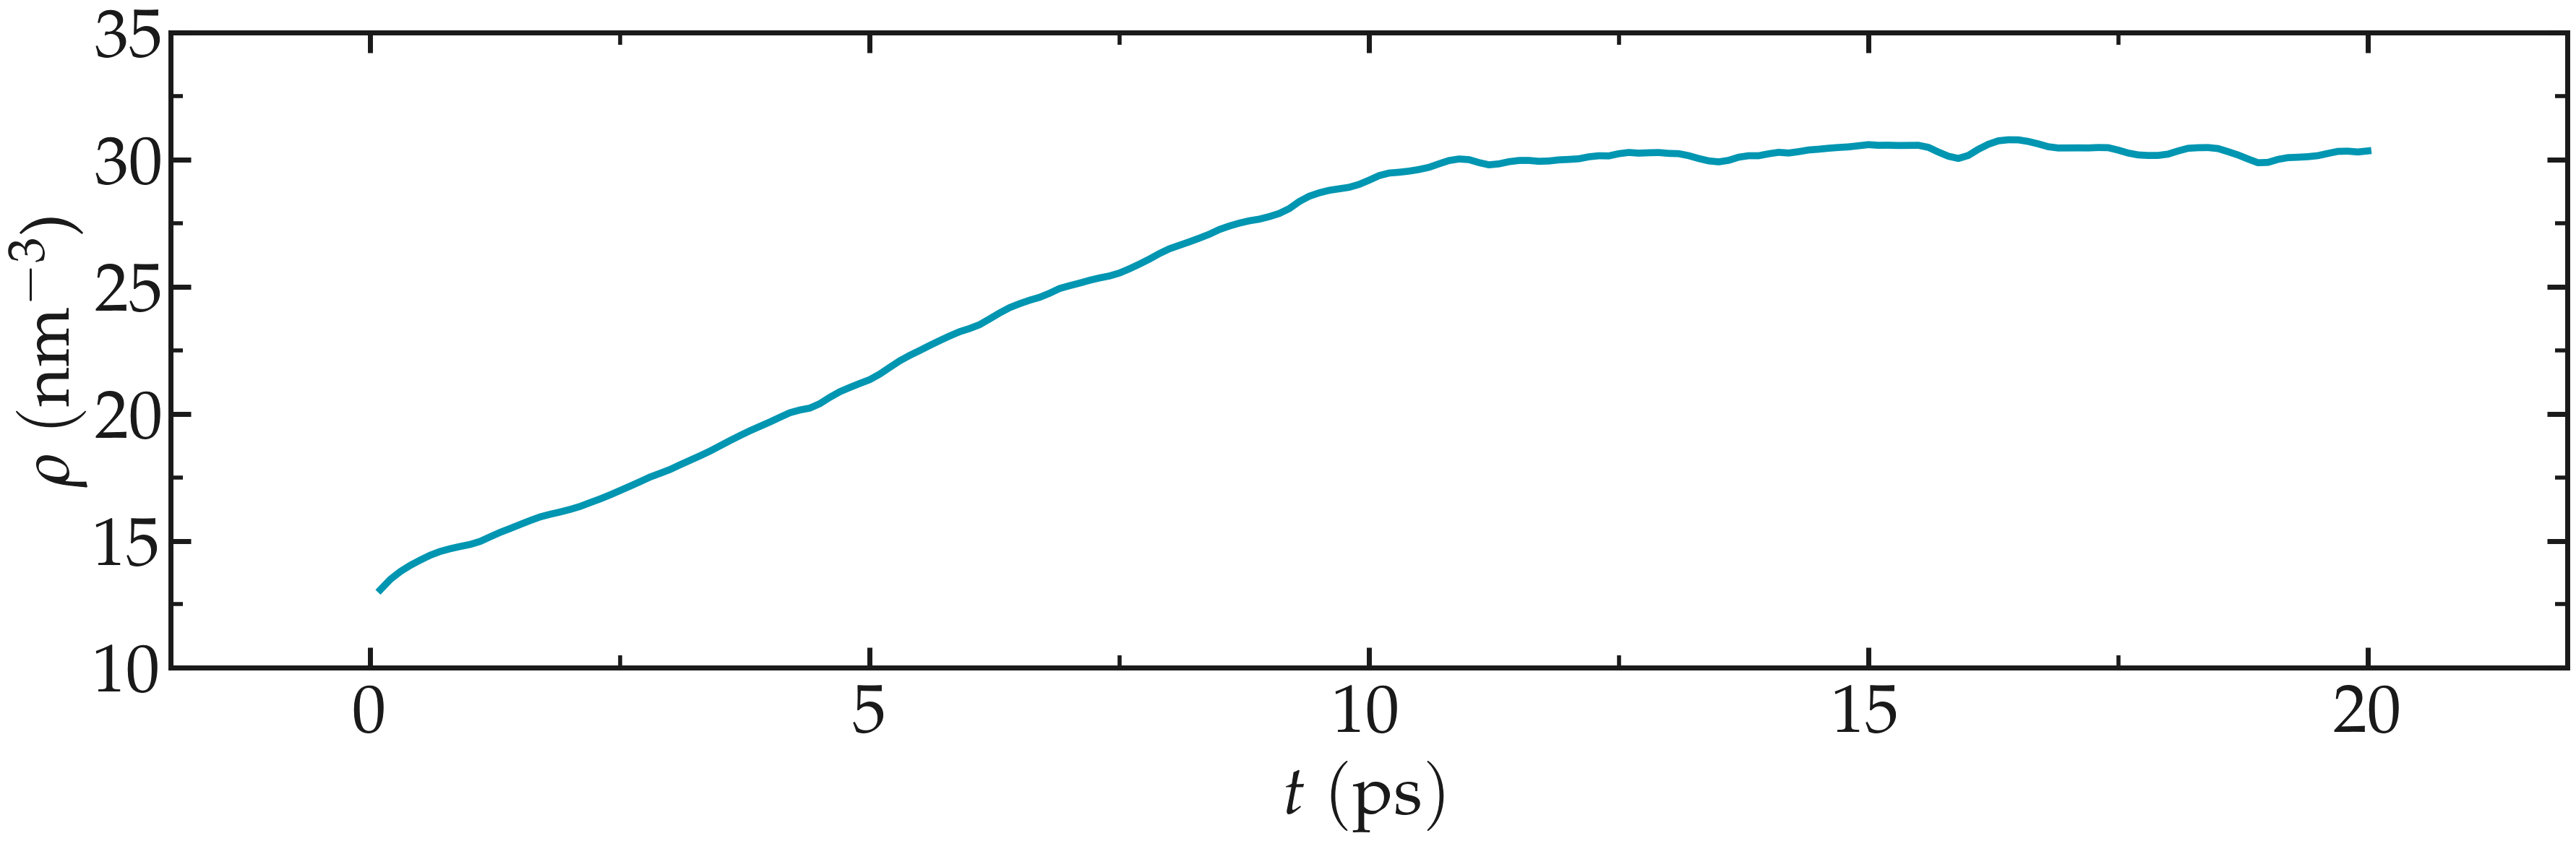 Curves showing the equilibration of the water reservoir